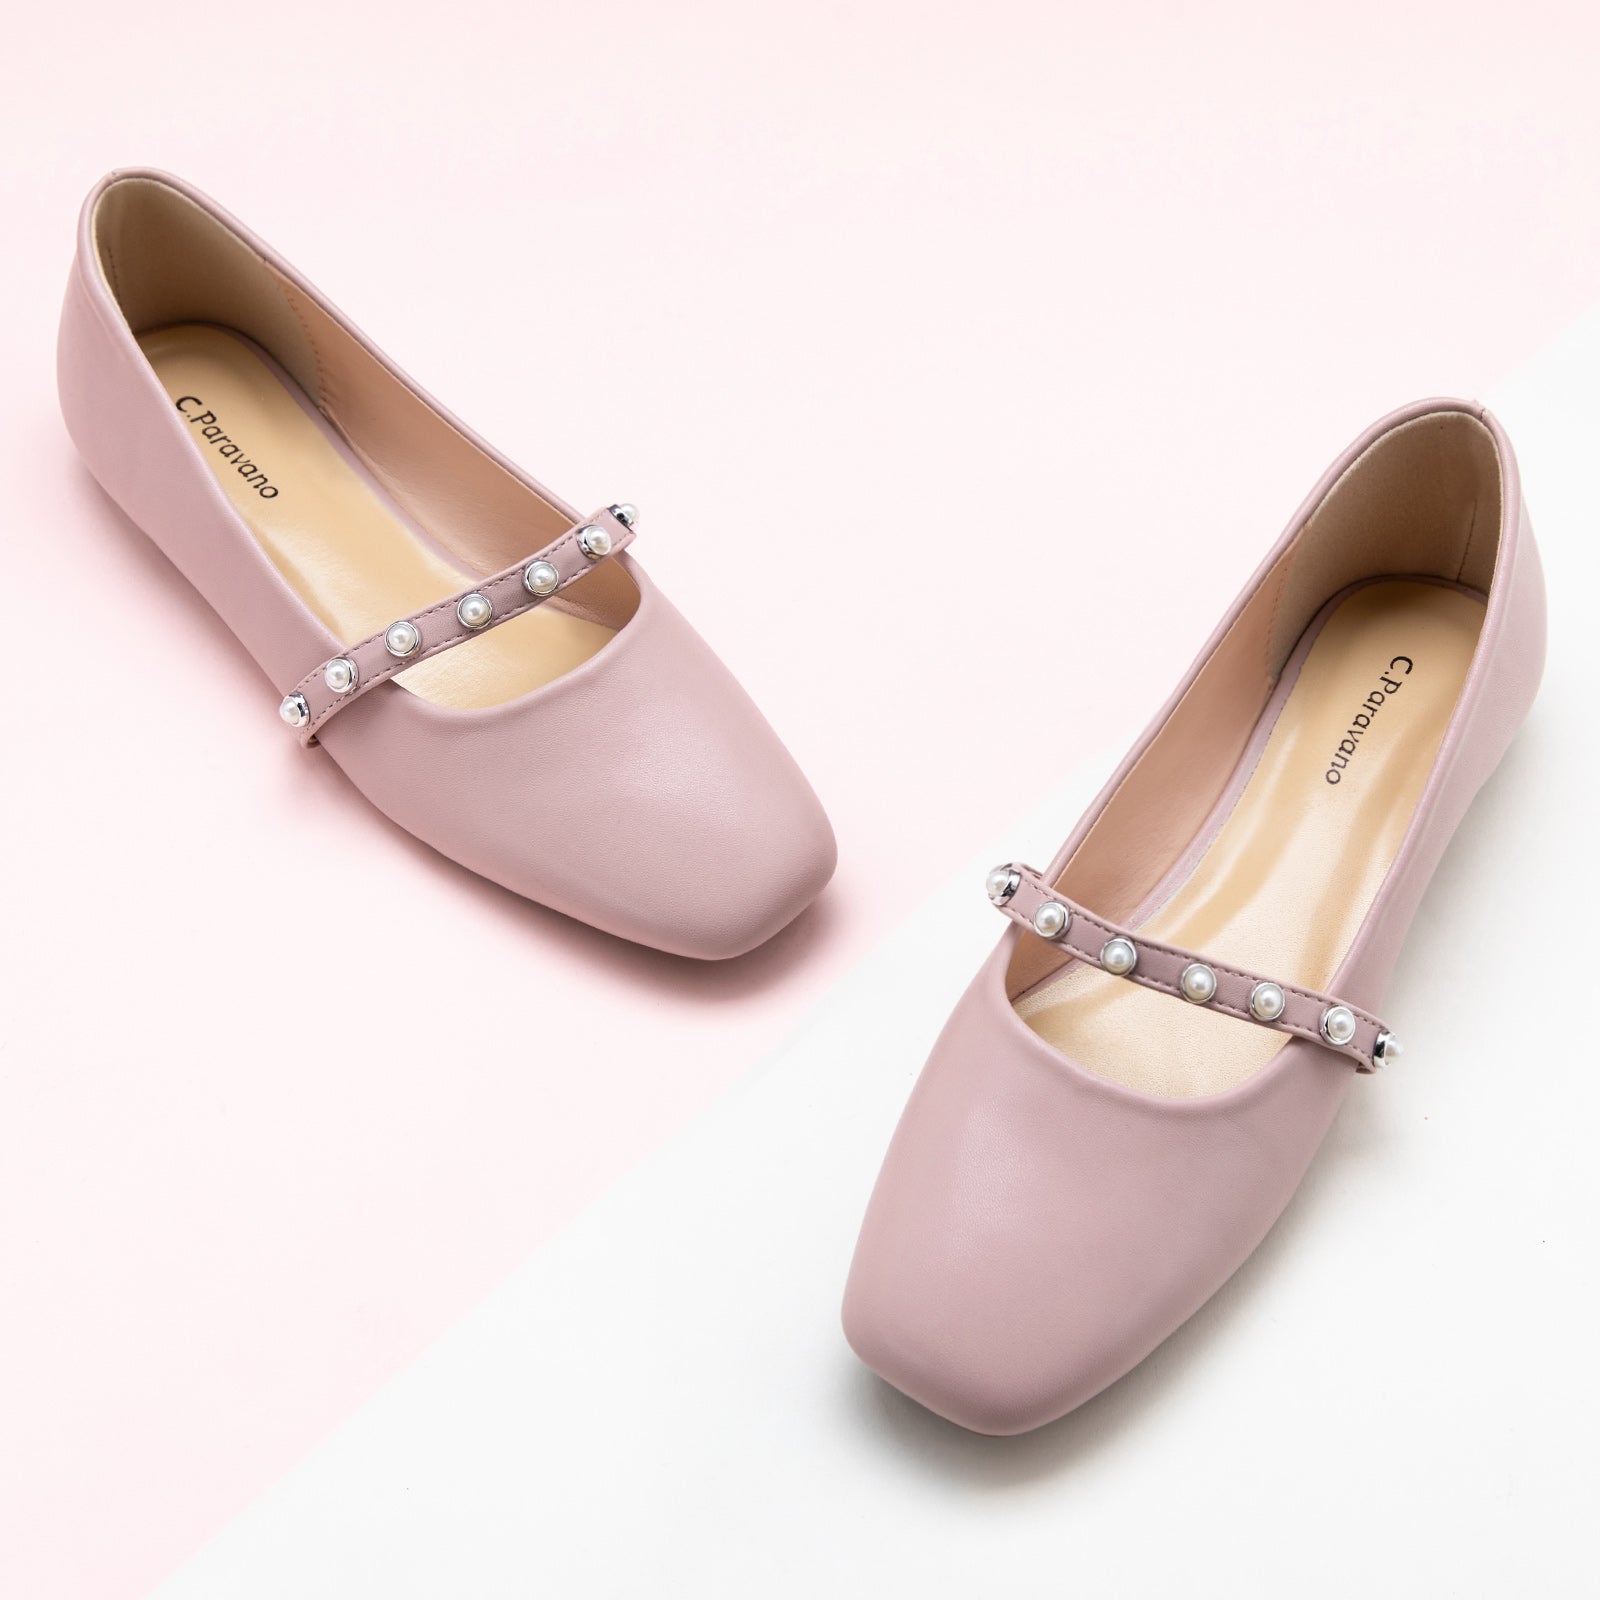 Pink Mary Jane Flats with a single stripe and pearl detail, featuring delicate details for a polished and sophisticated style